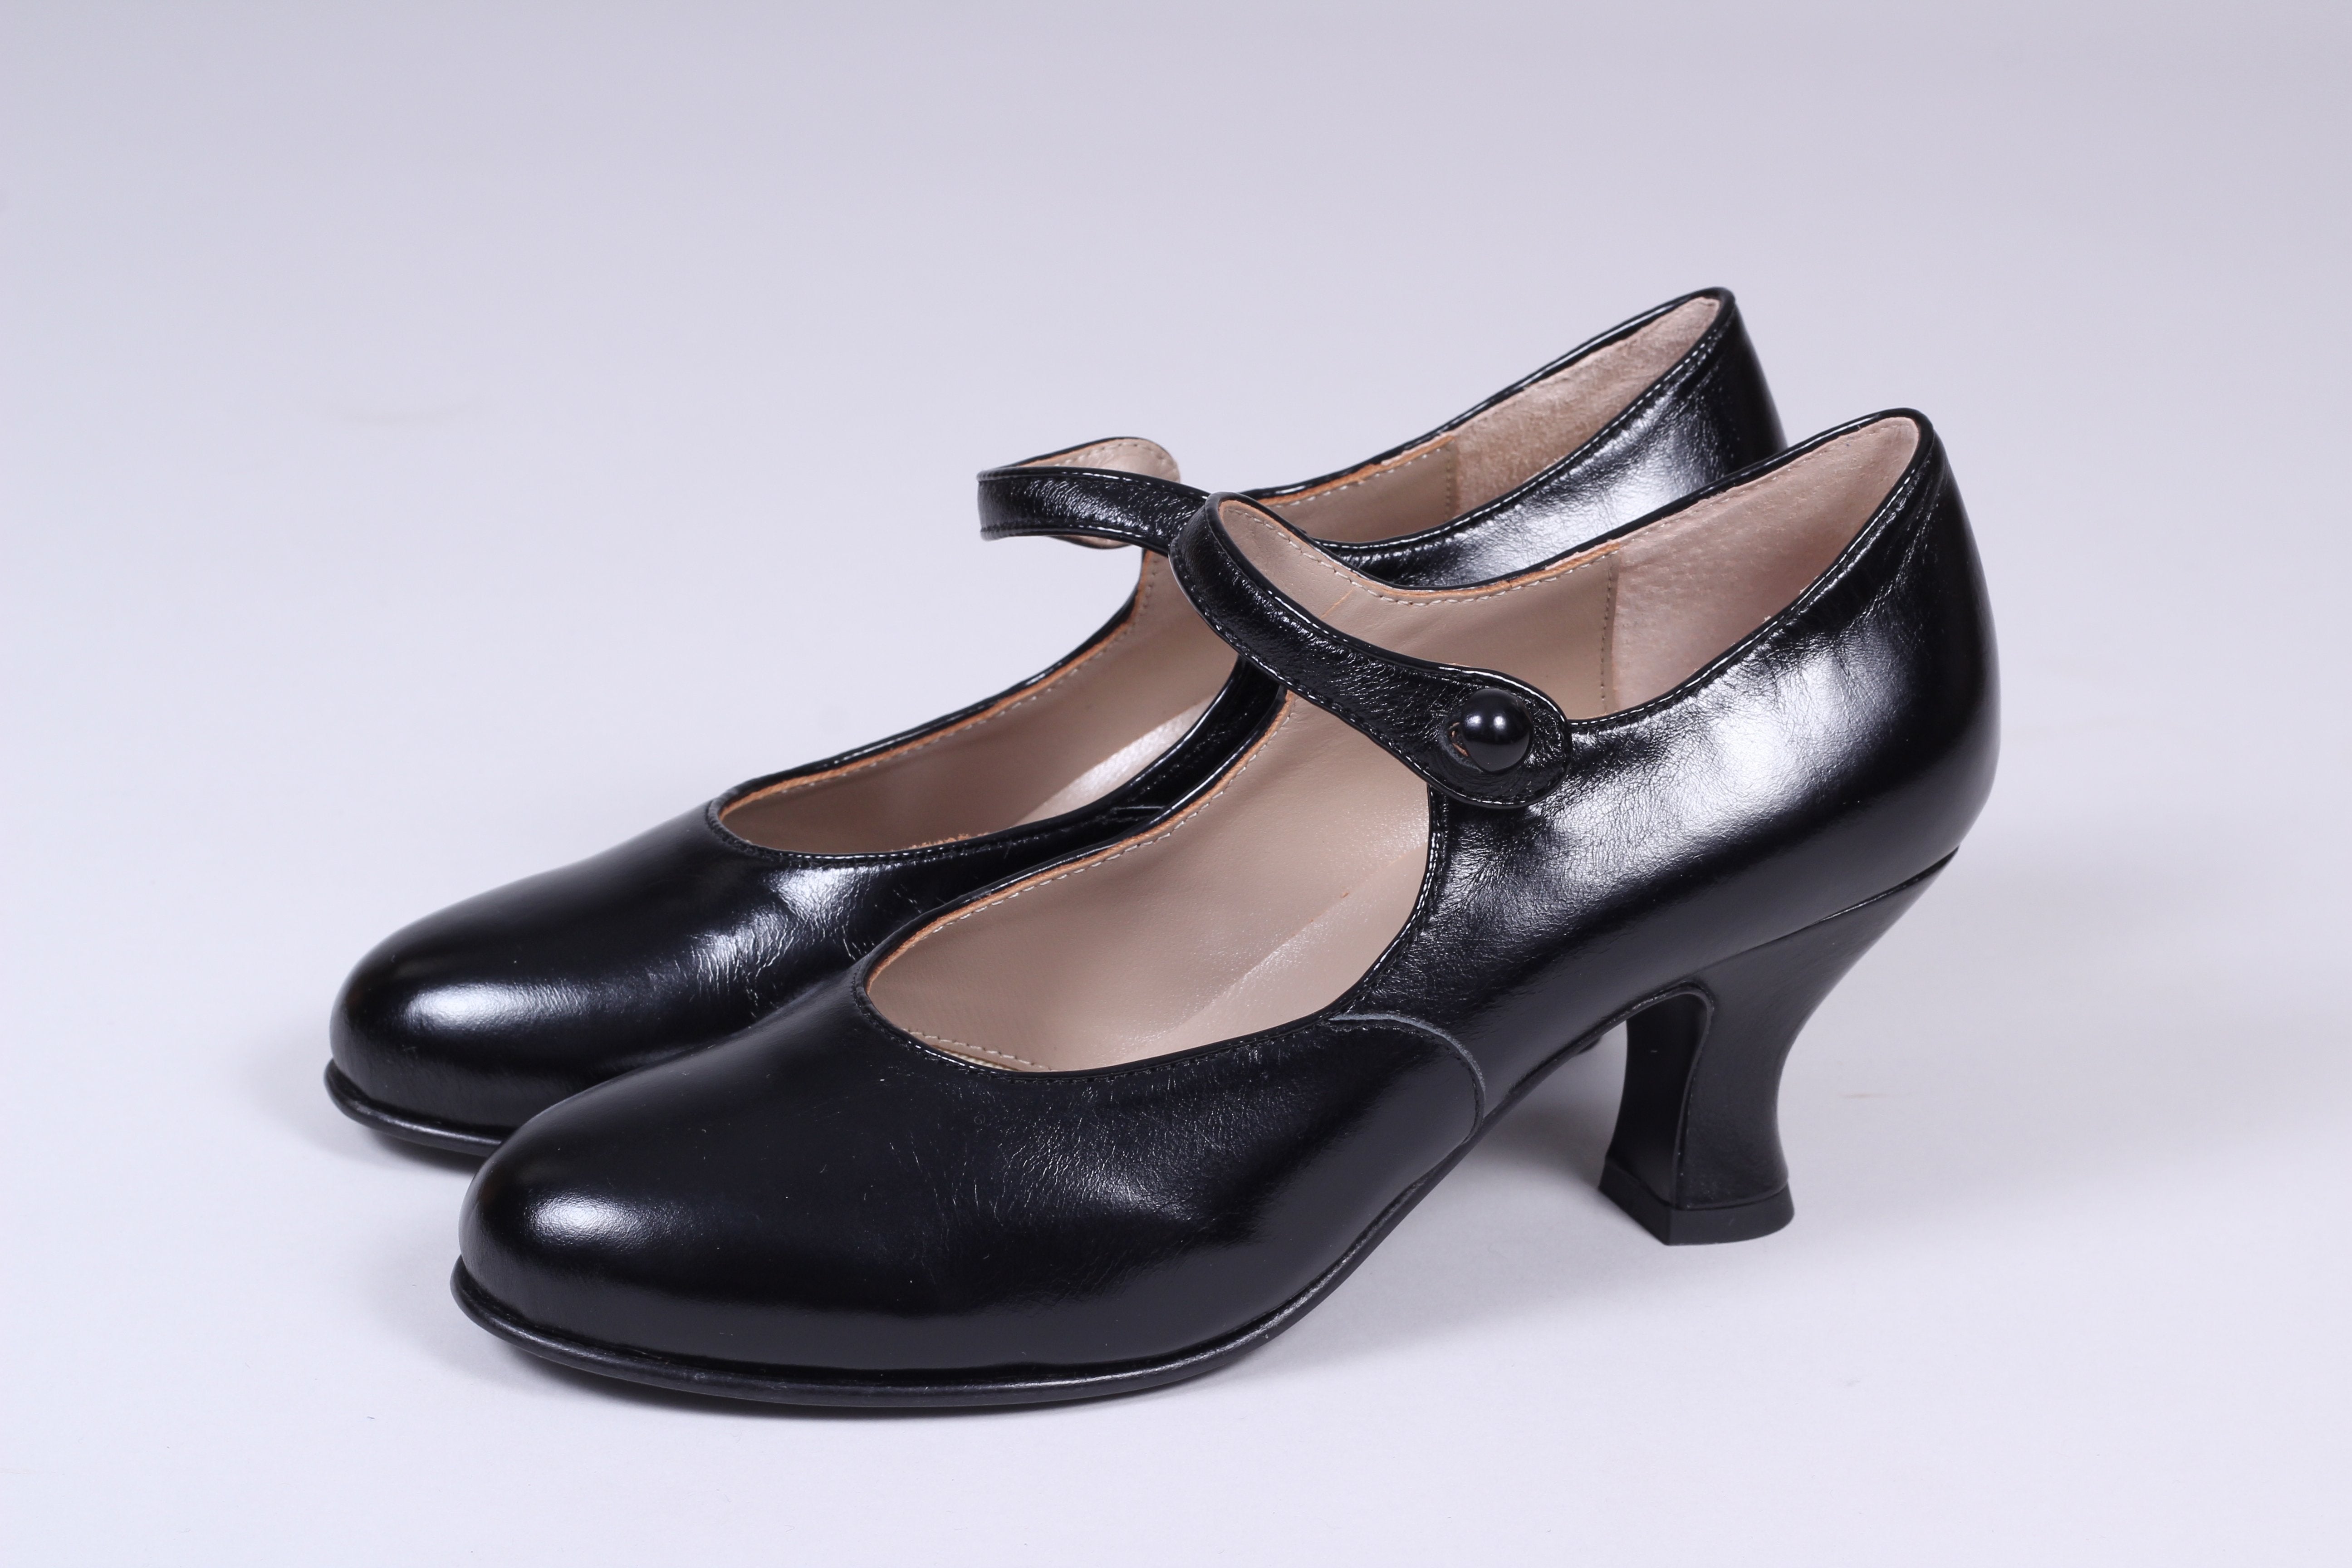 Vintage inspired 20's Mary Jane pumps - Asta